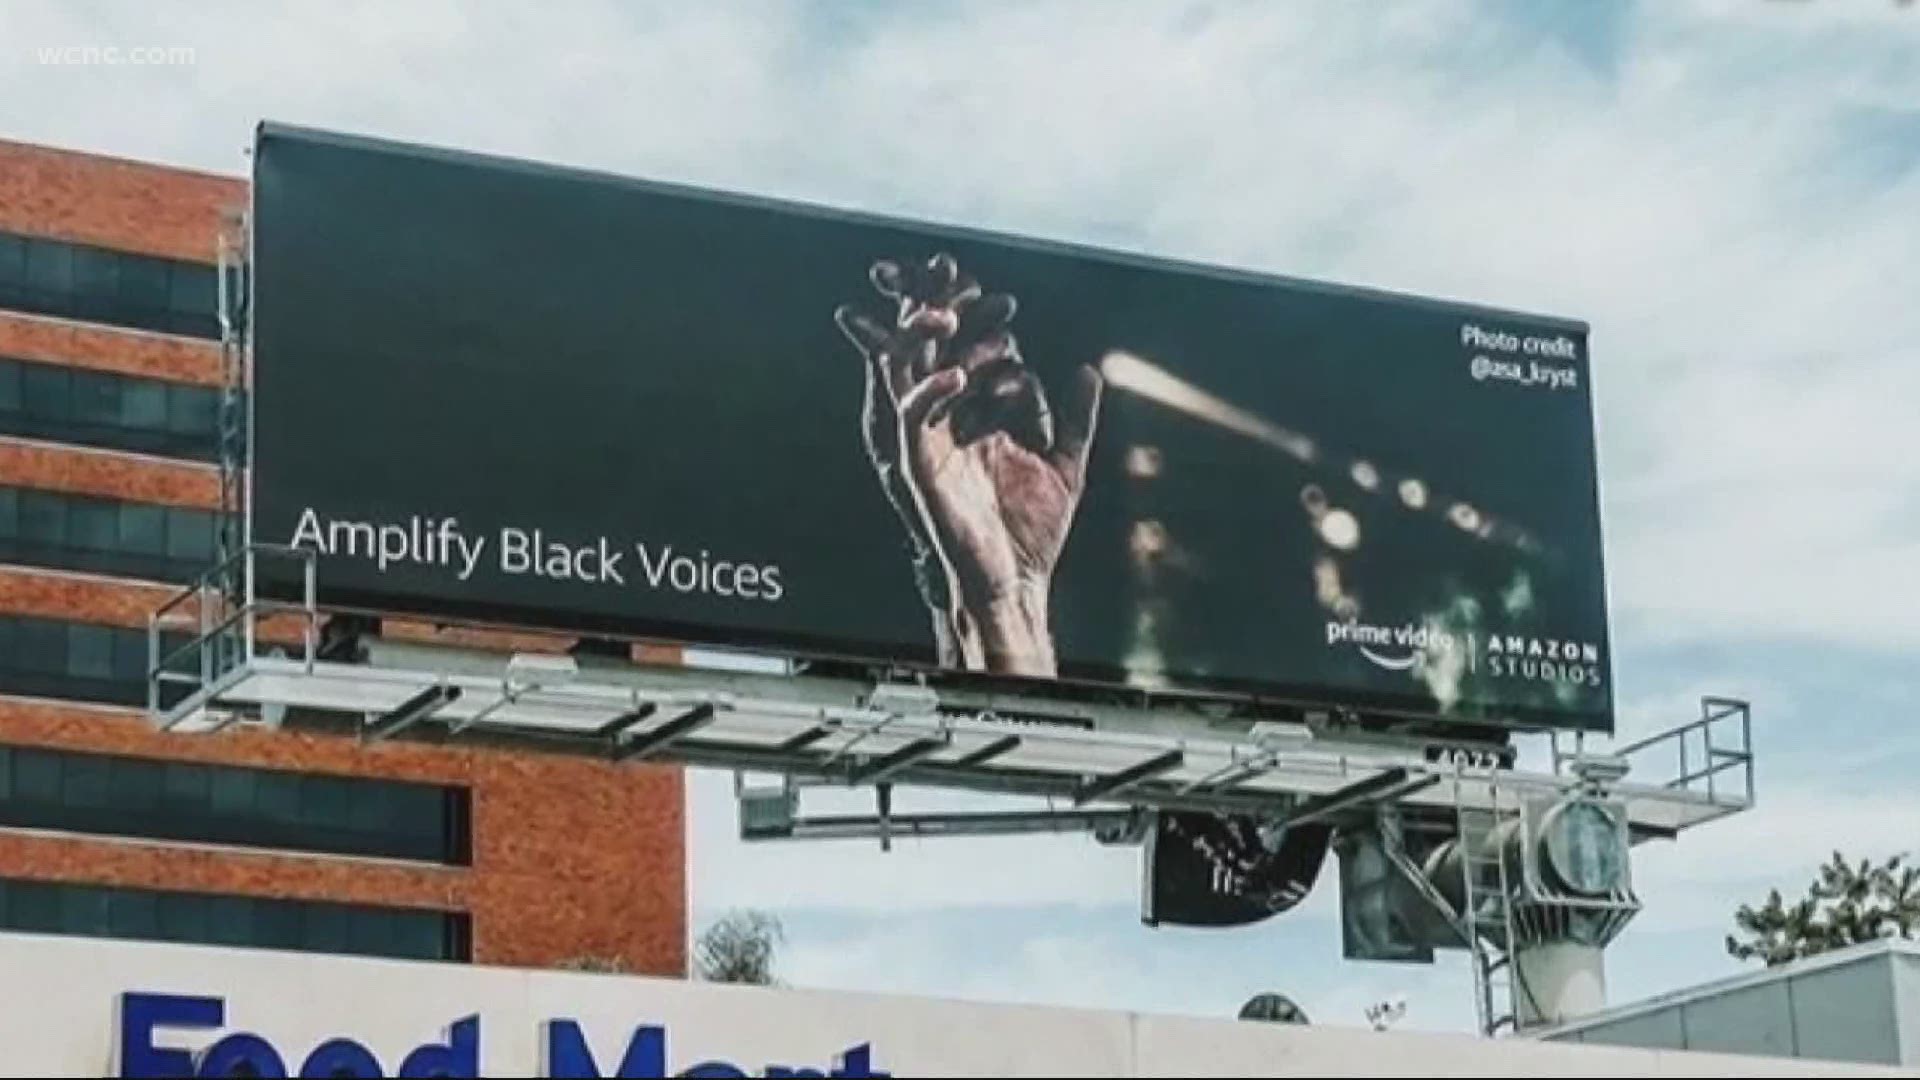 An image taken by Charlotte visual storyteller Asa Kryst during a Queen City protest is now getting recognized by Amazon on billboards around Los Angeles.